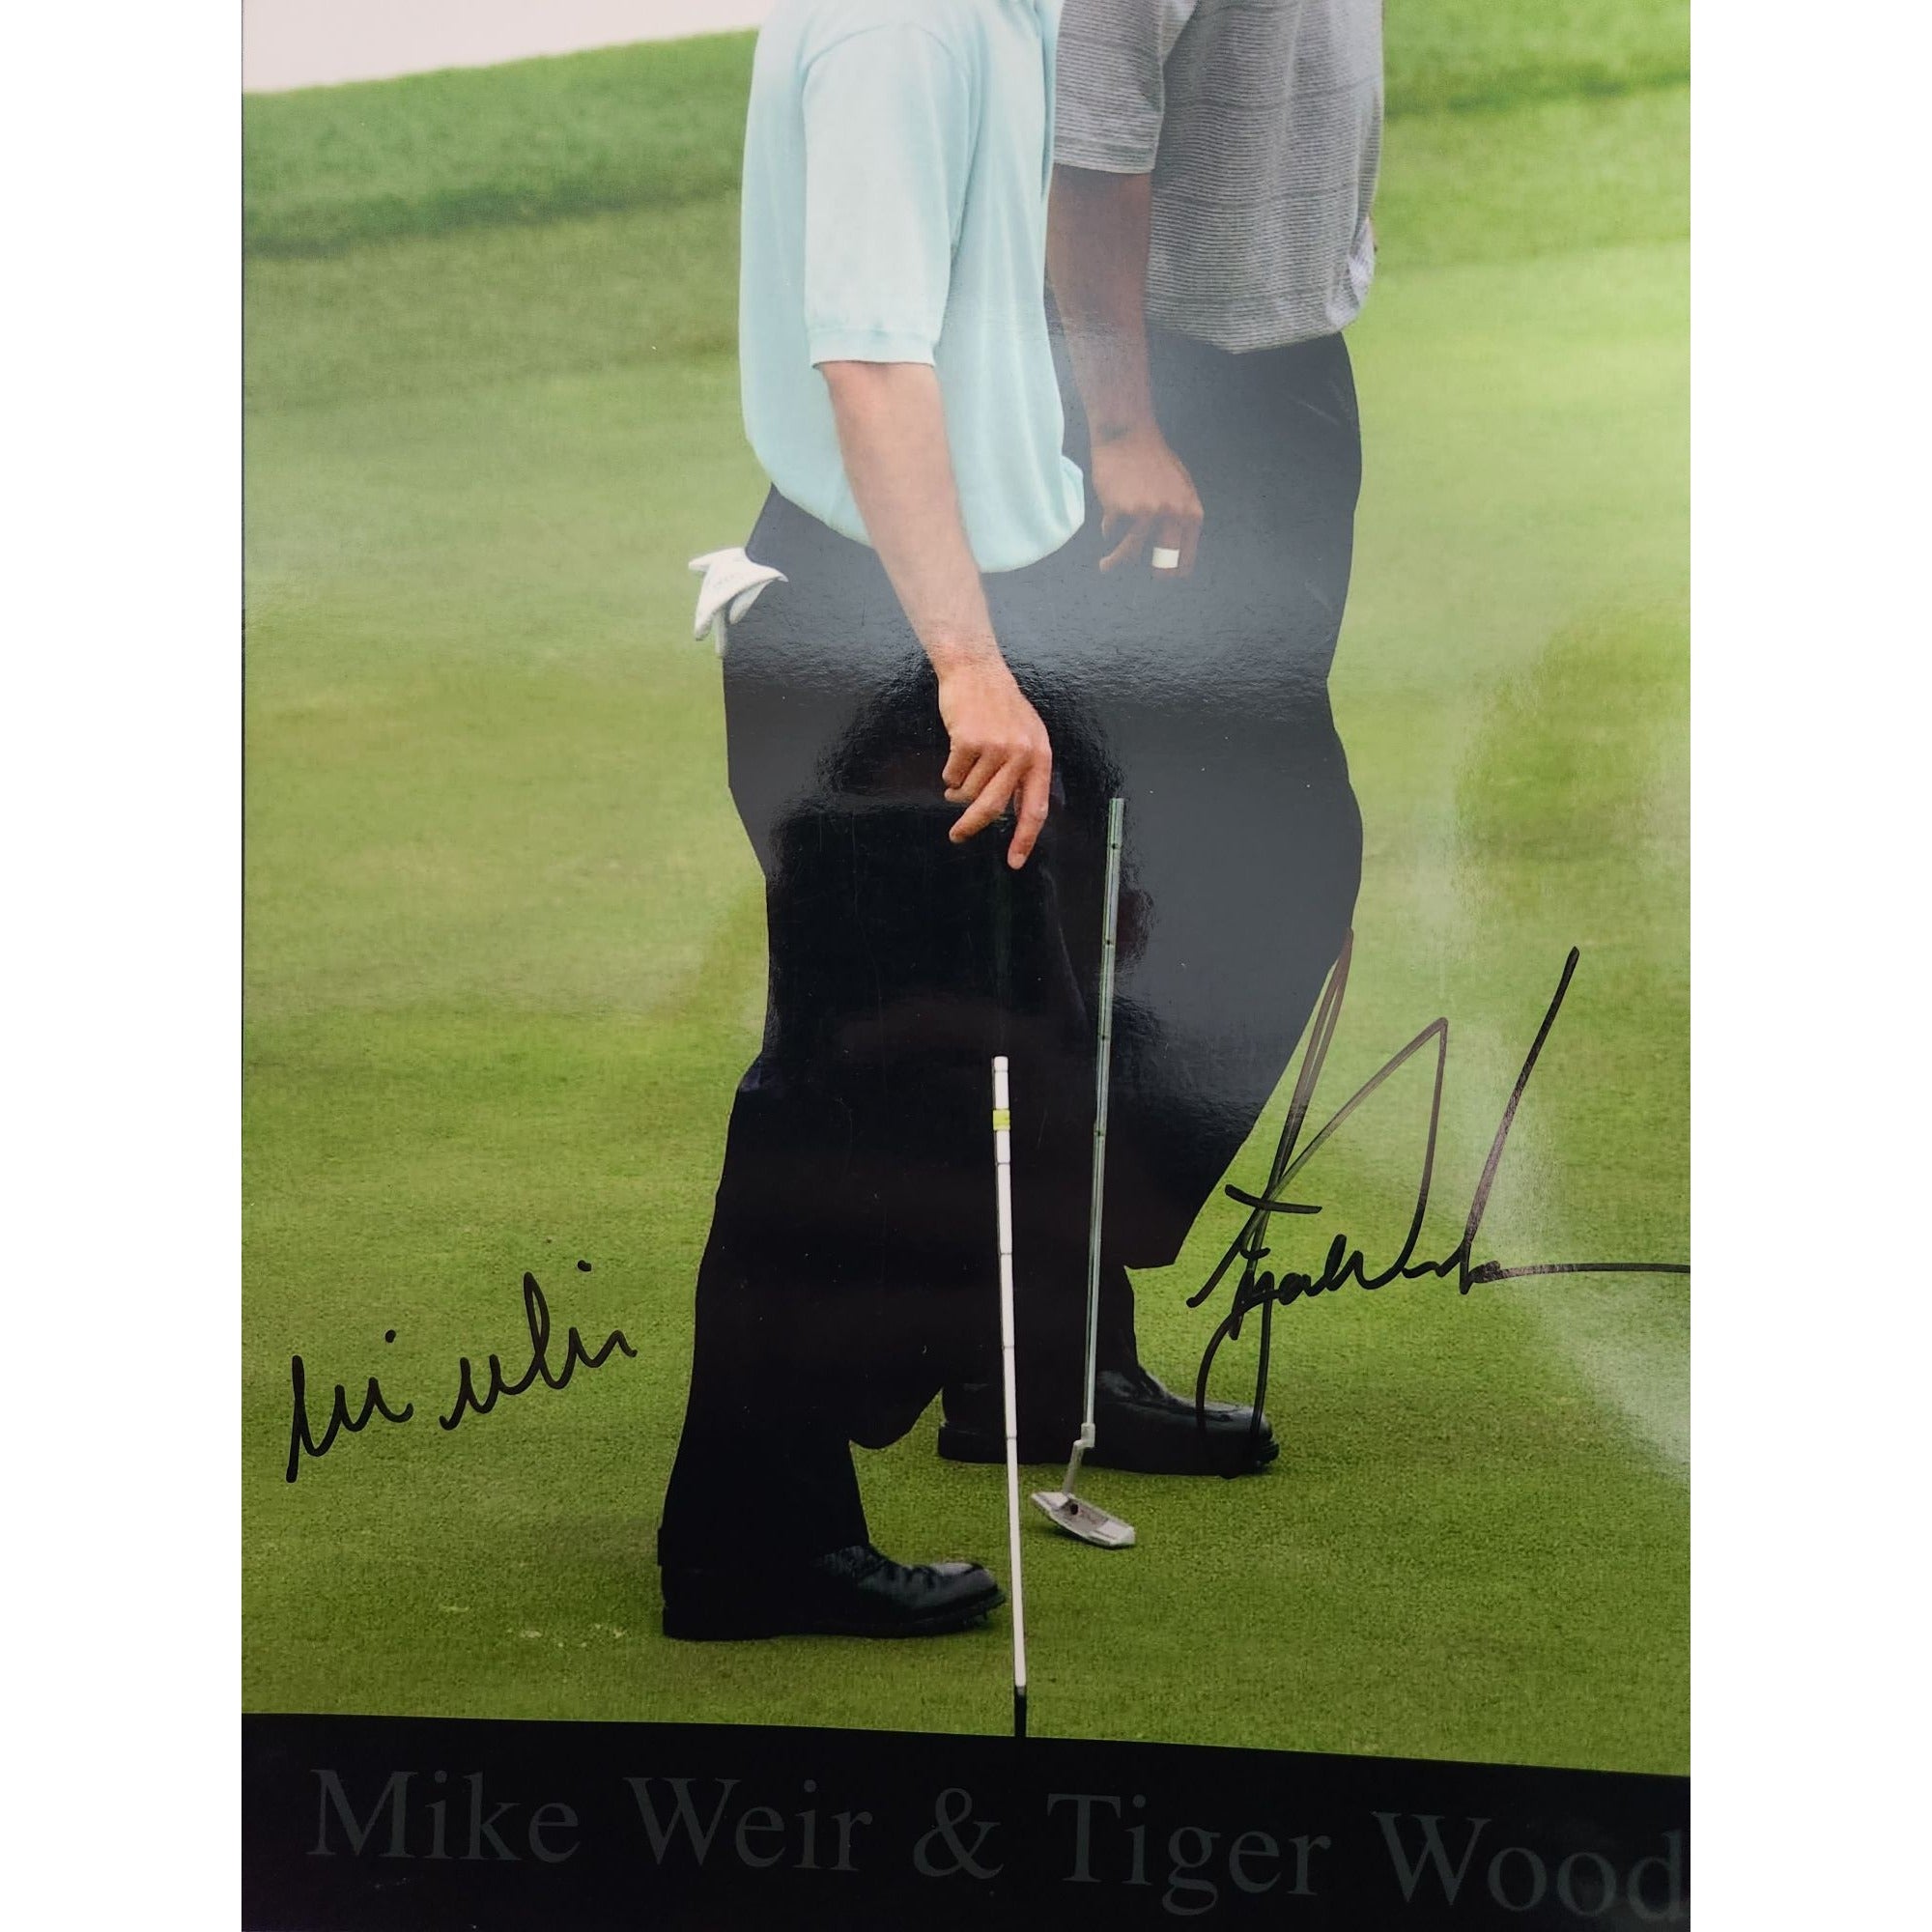 Tiger Woods Mike Weir 11x17 photo signed